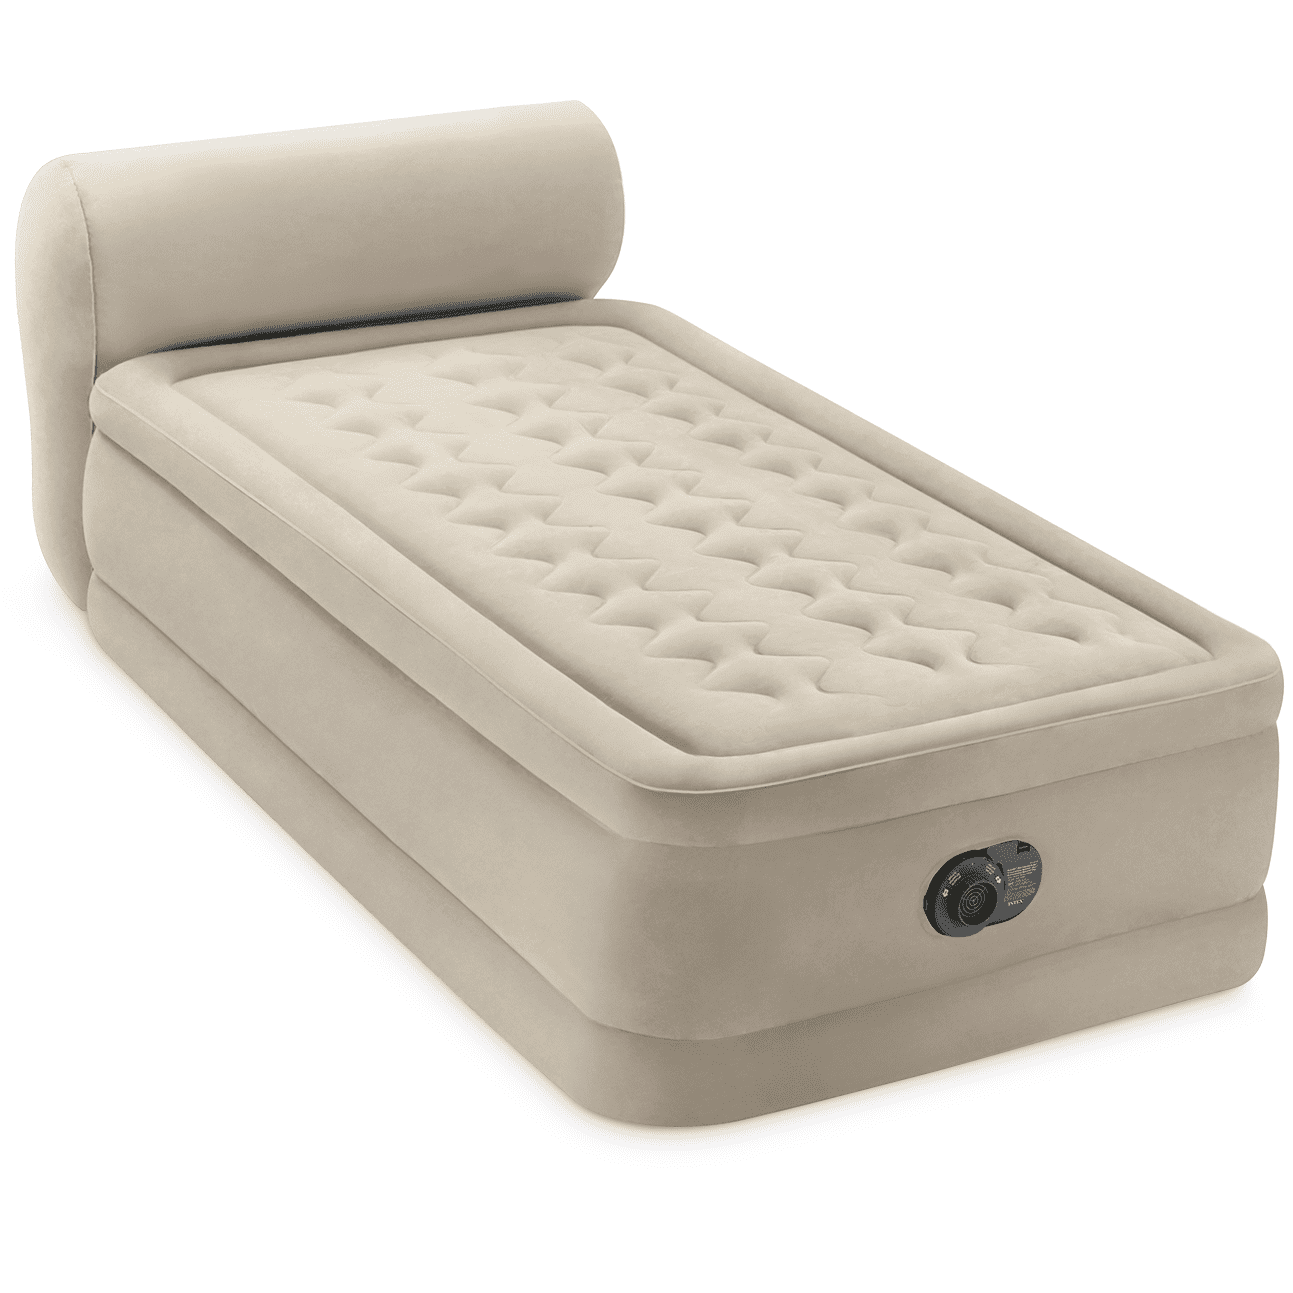 Intex Ultra Plush Dura Beam Deluxe Airbed with Built In Pump & Headboard Queen 